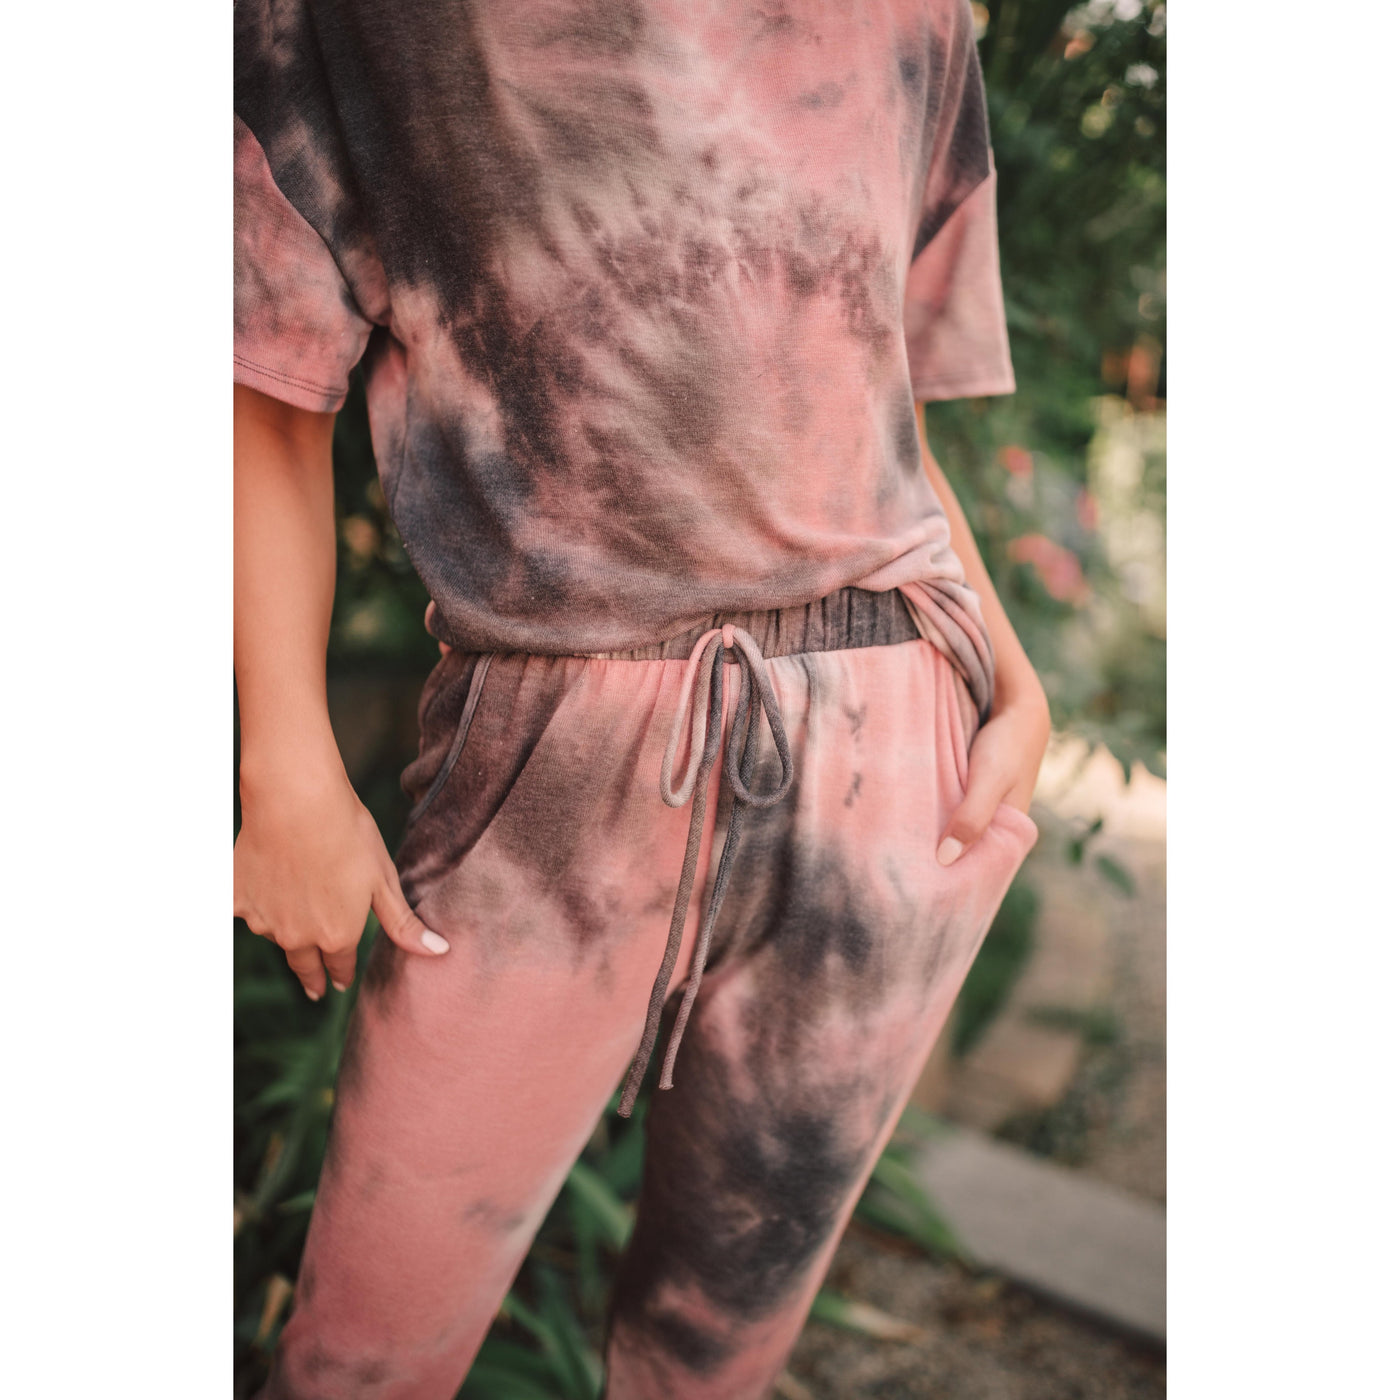 Forgotten Dreams Tie Dye Joggers In Mauve-Womens-Graceful & Chic Boutique, Family Clothing Store in Waxahachie, Texas